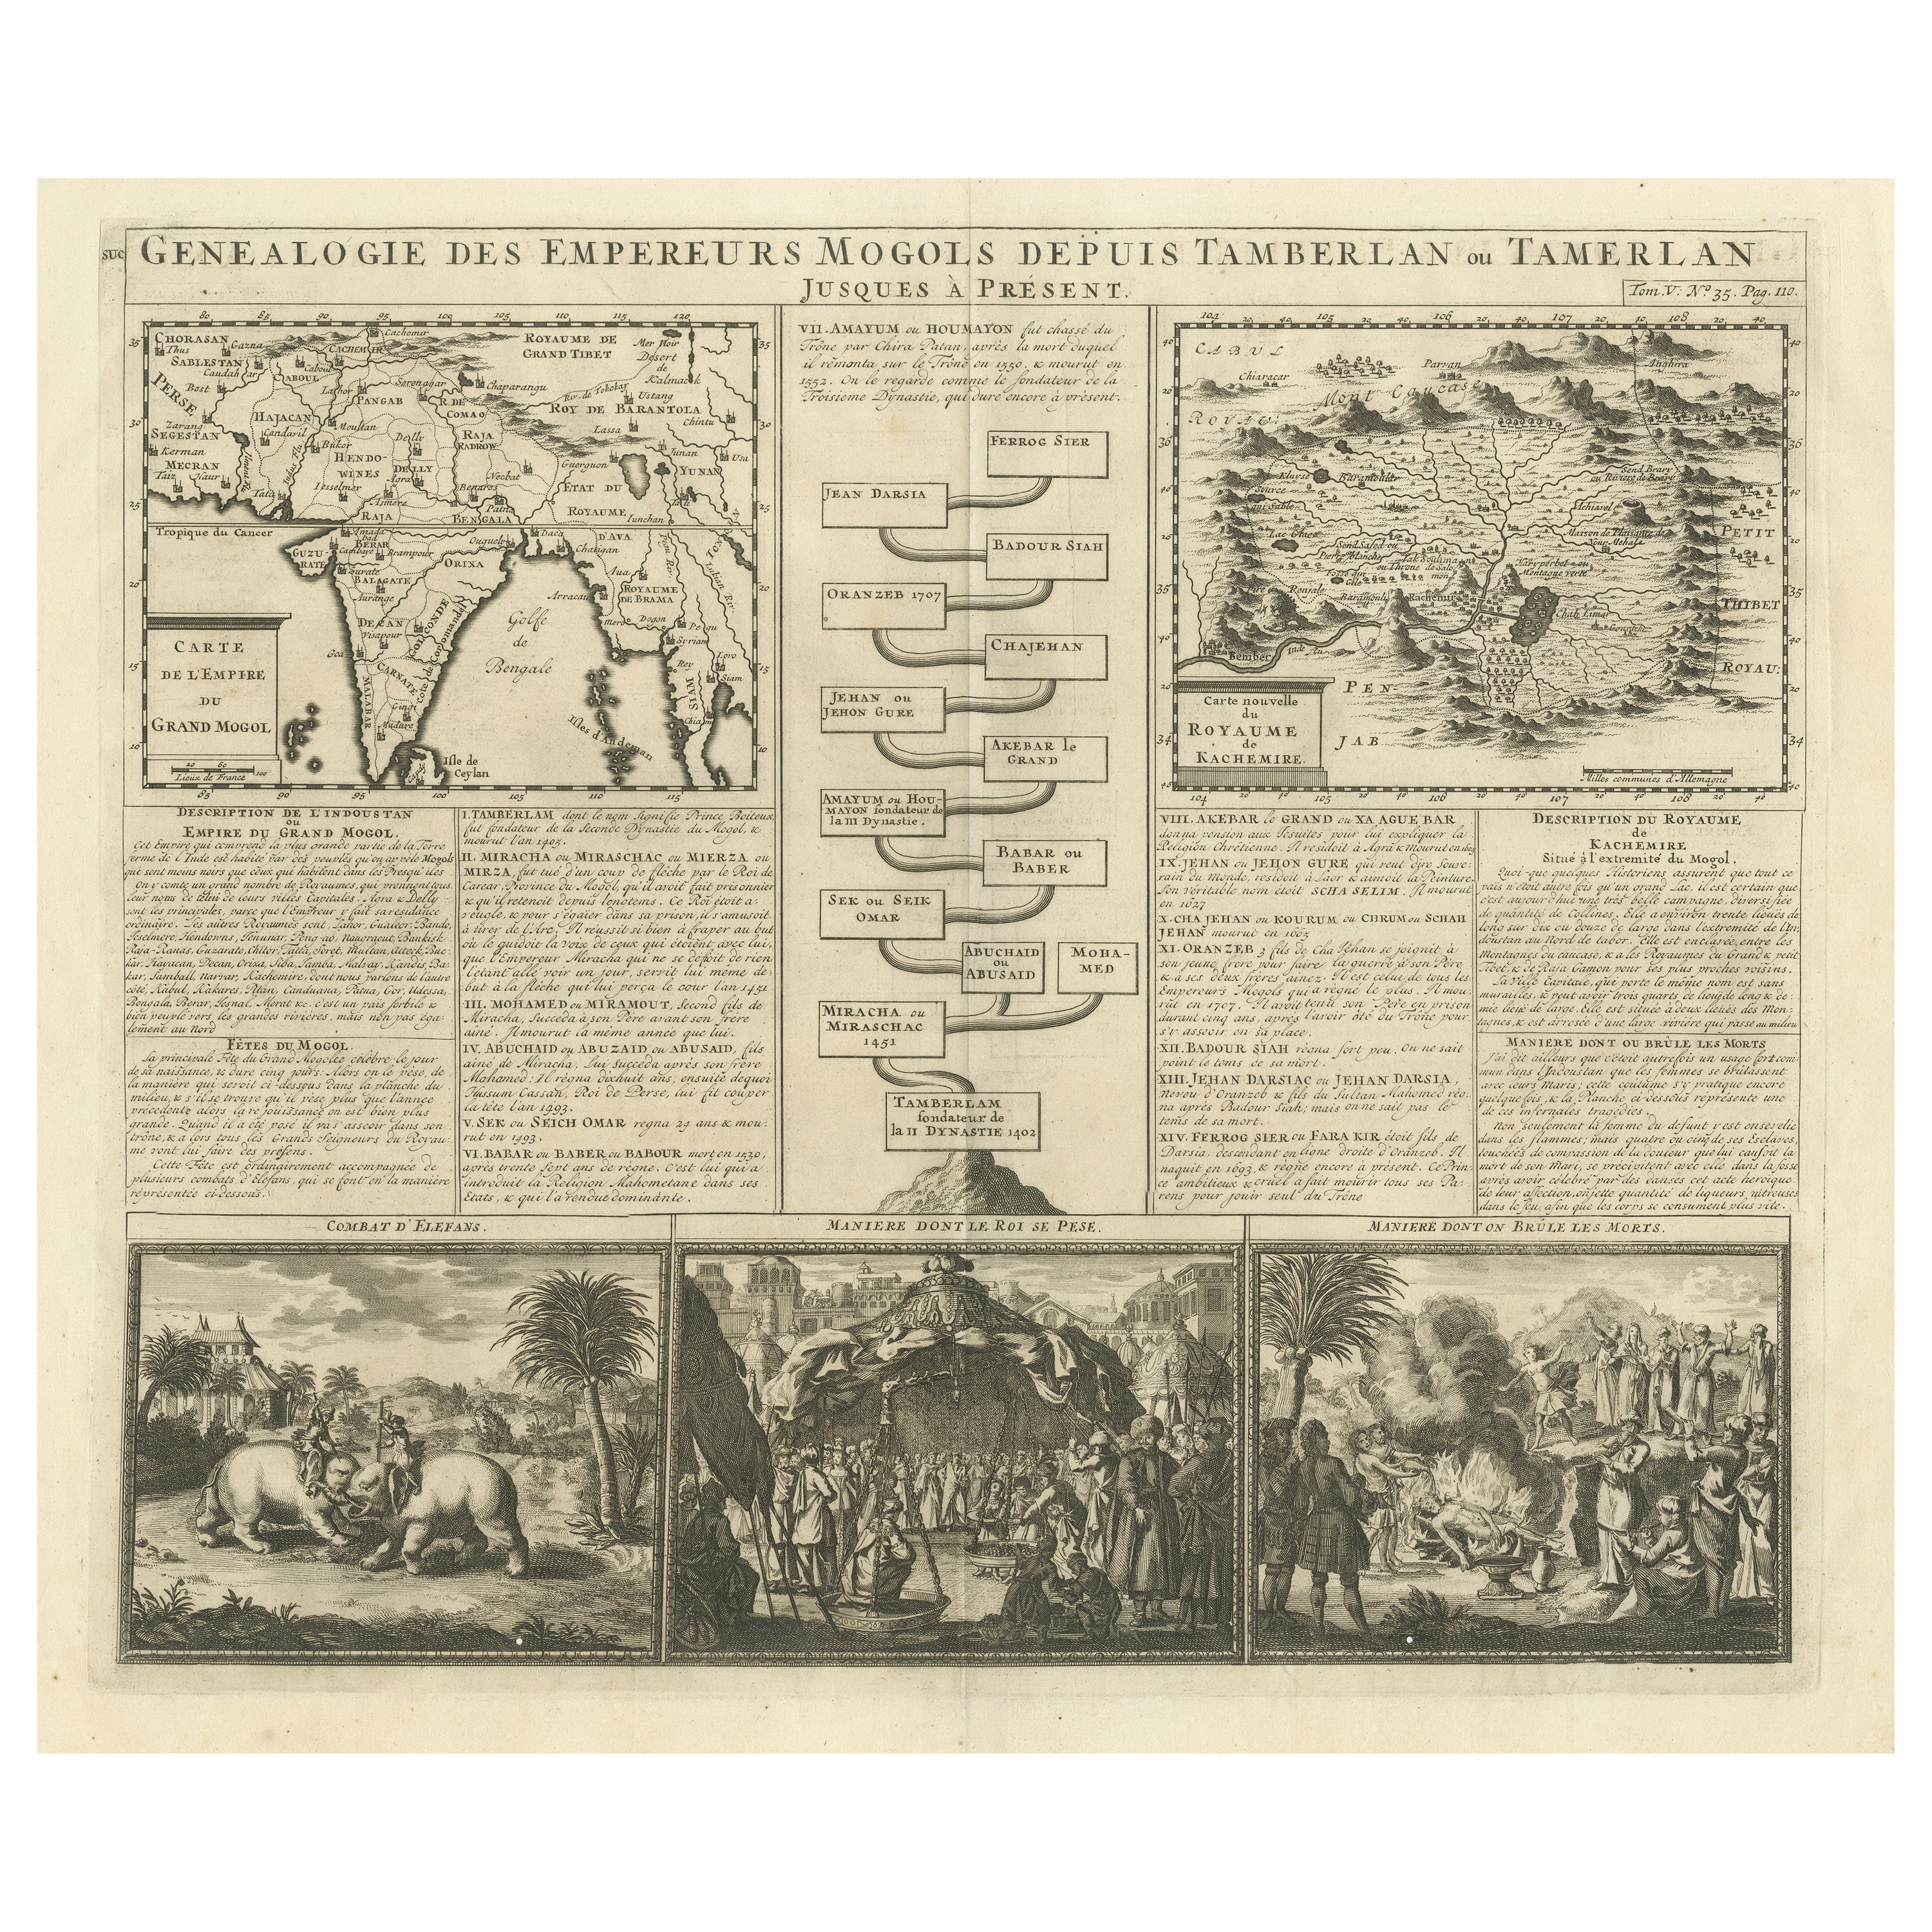 Antique Map of the Empire of the Great Mogol and the Kingdom of Kachimere For Sale